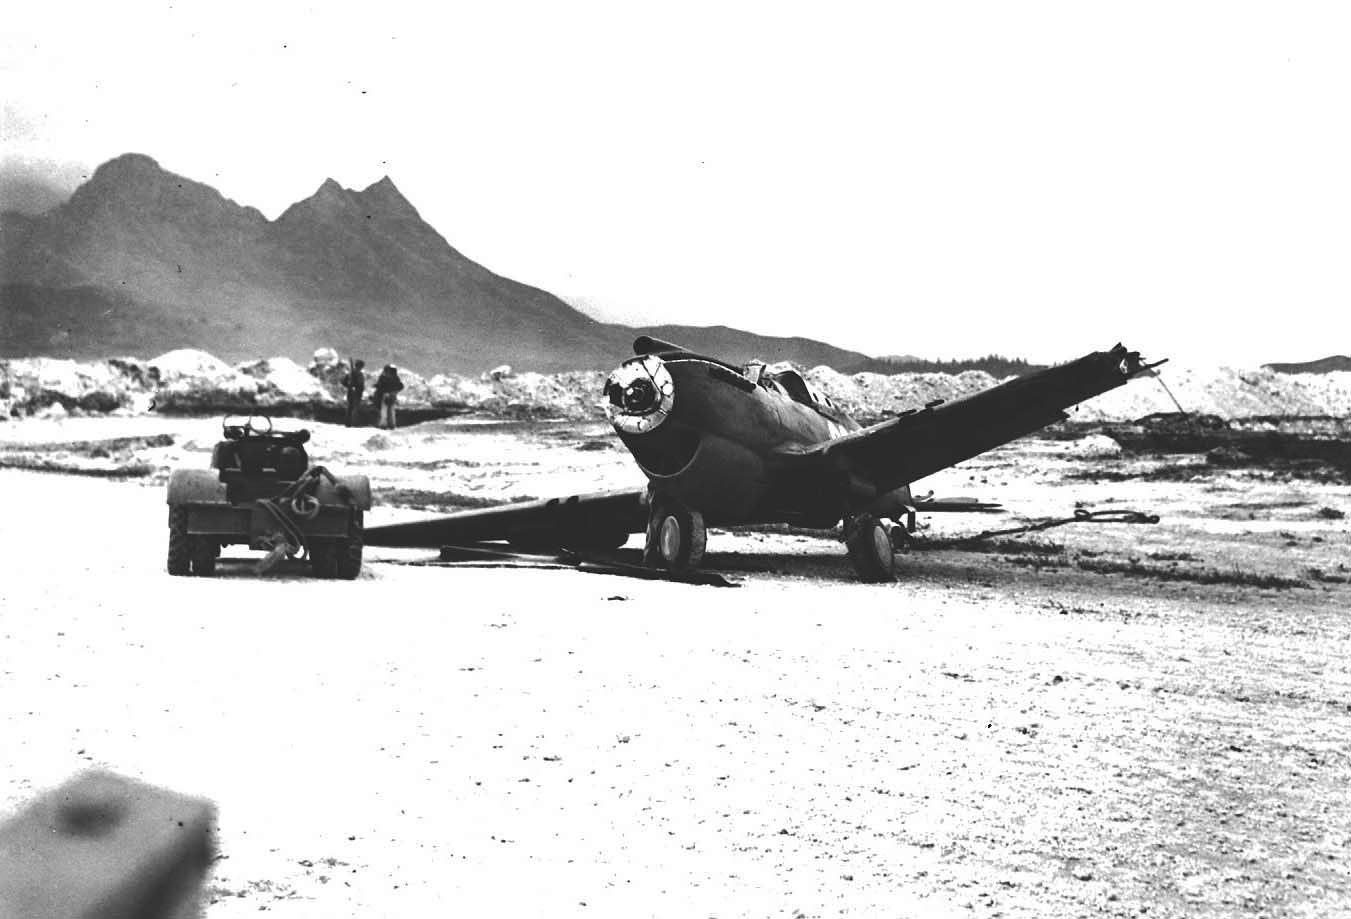 P-40 Warhawk aircraft damaged in a taxiing accident with another P-40 at Bellows Field, Oahu, US Territory of Hawaii, 8 Dec 1941, photo 2 of 3